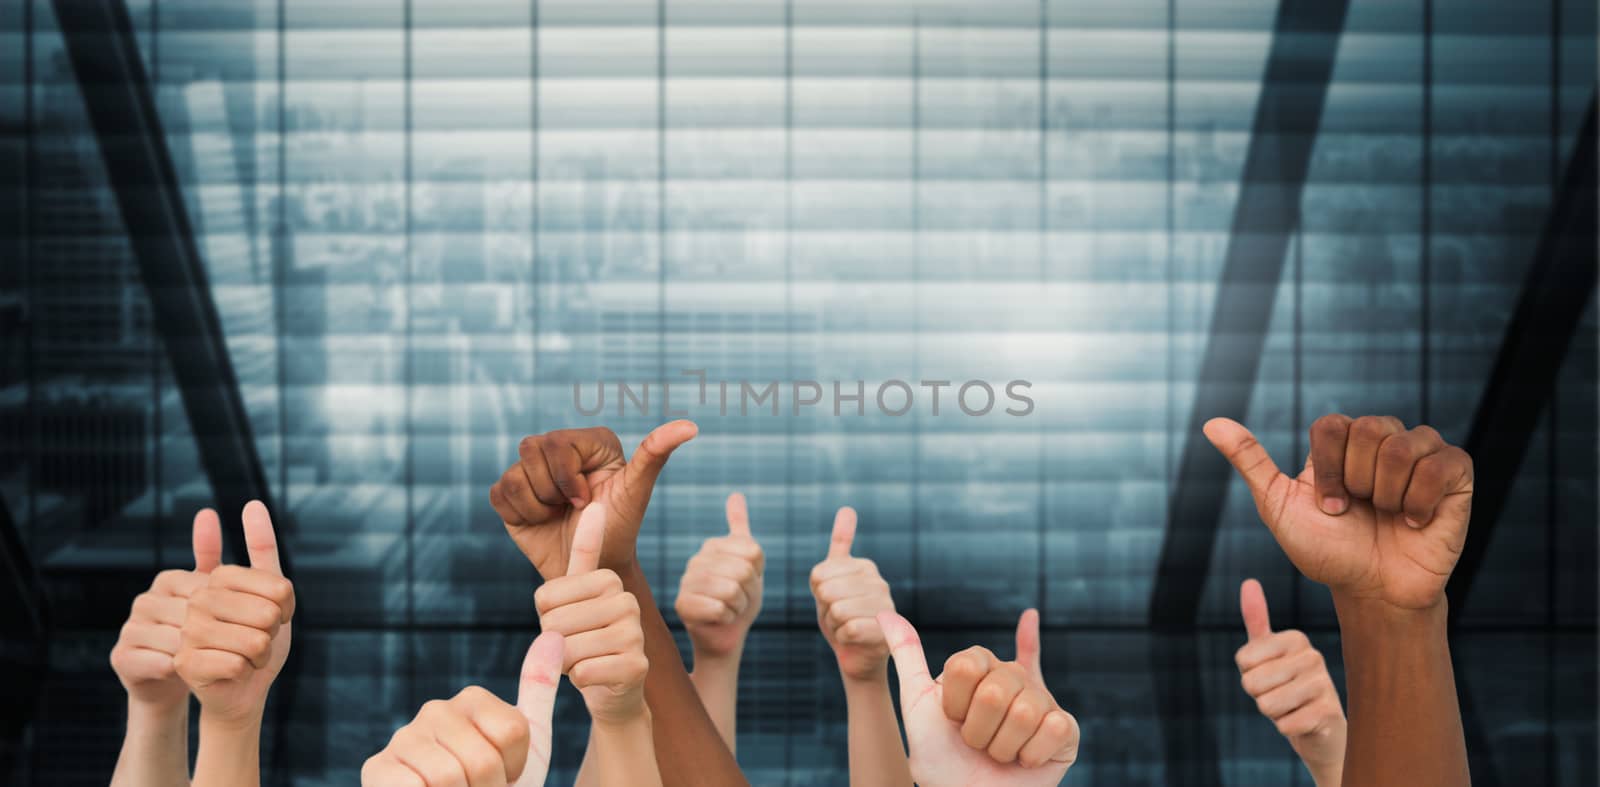 Hands giving thumbs up  against room with large window looking on city